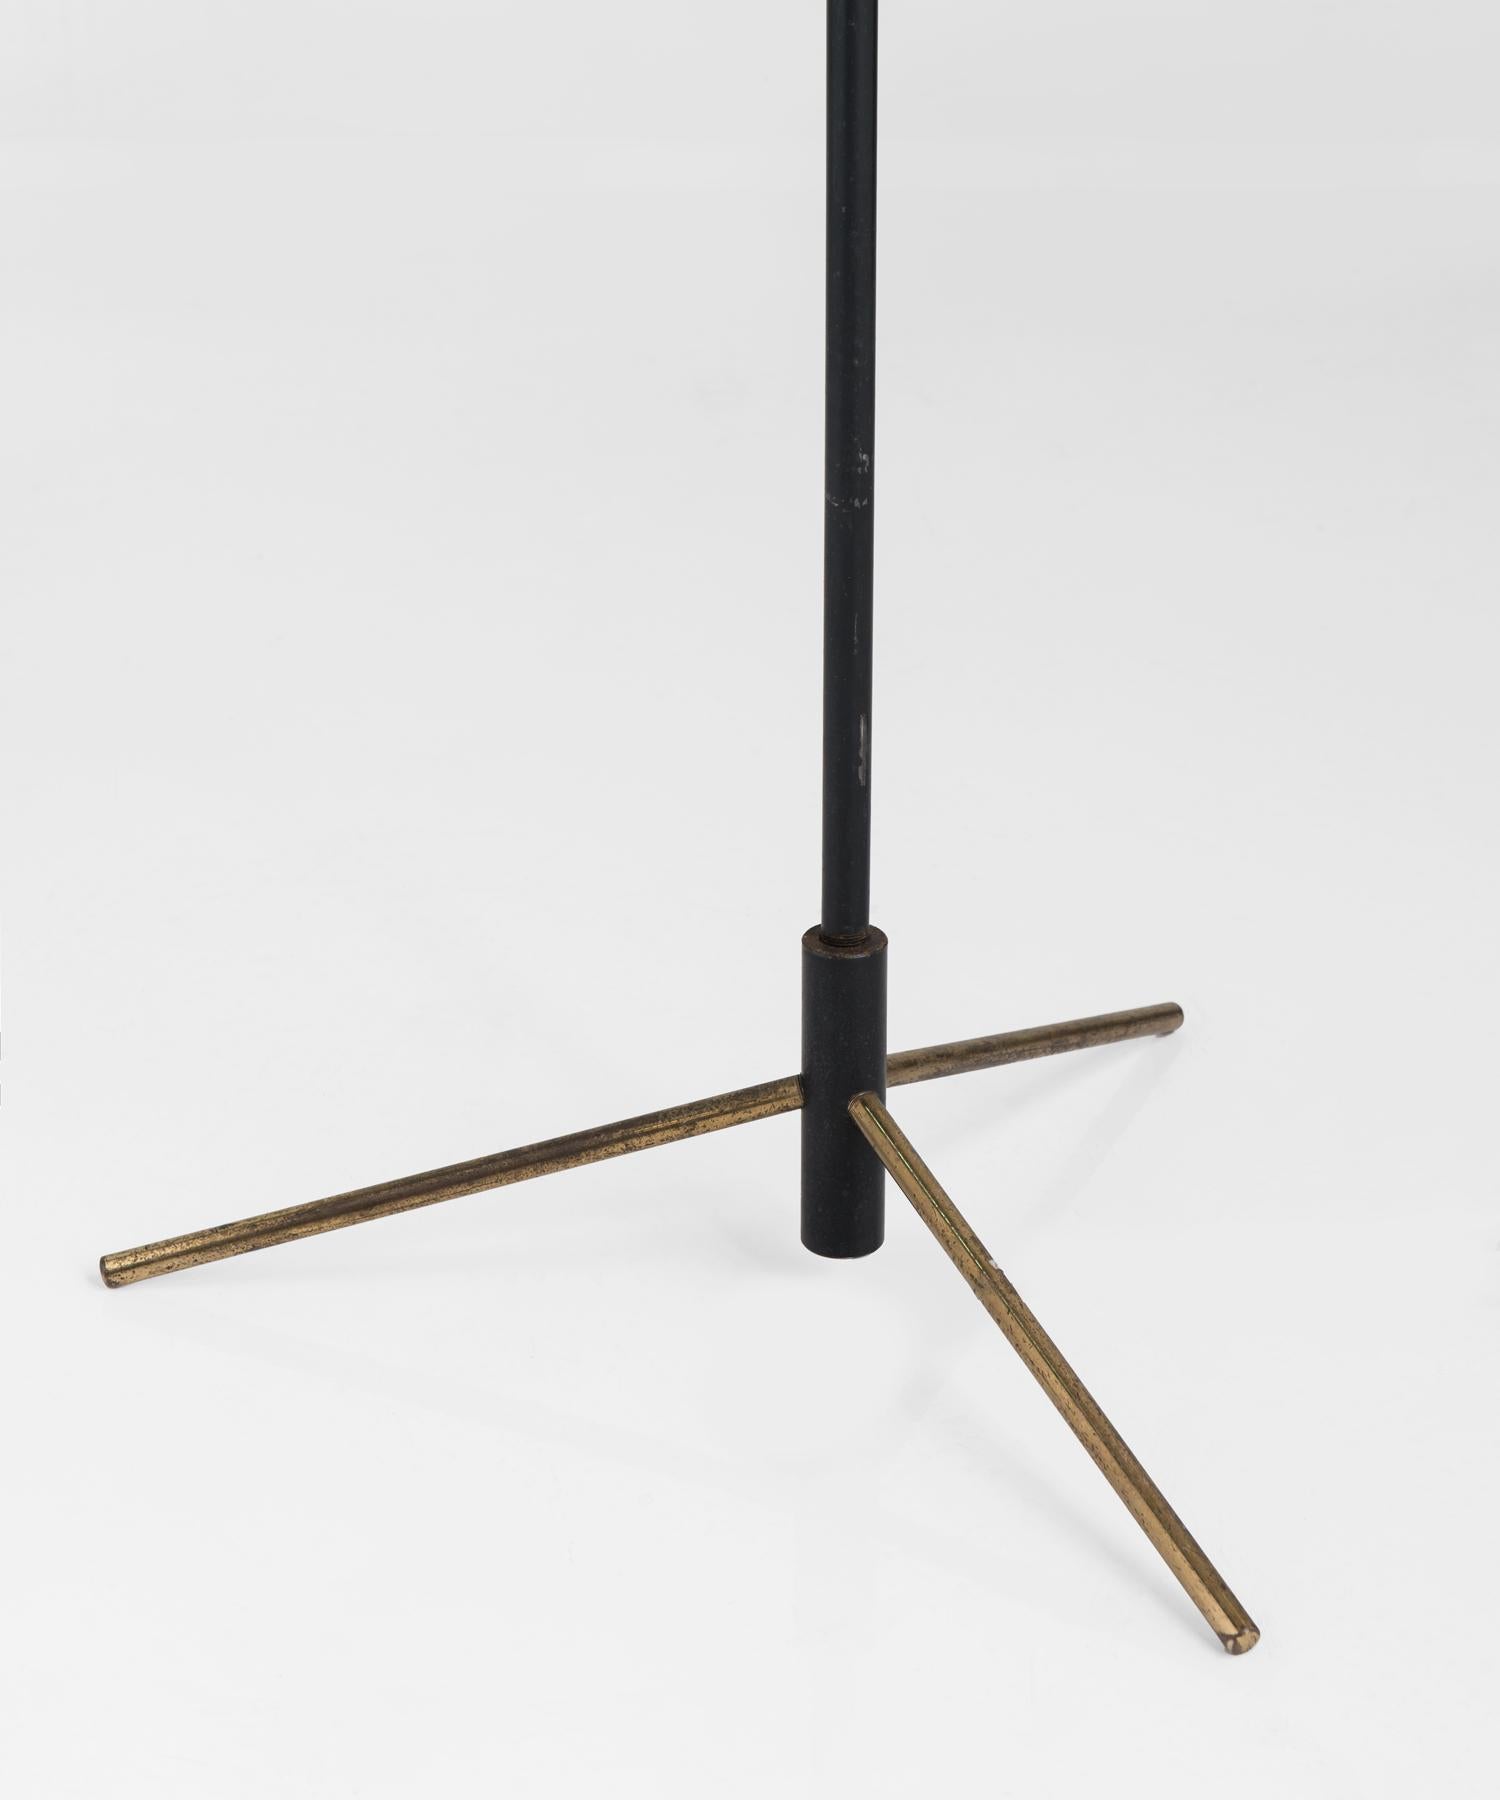 Mid-20th Century Brass and Metal Floor Lamp with Fiberglass Shade, Italy, circa 1960